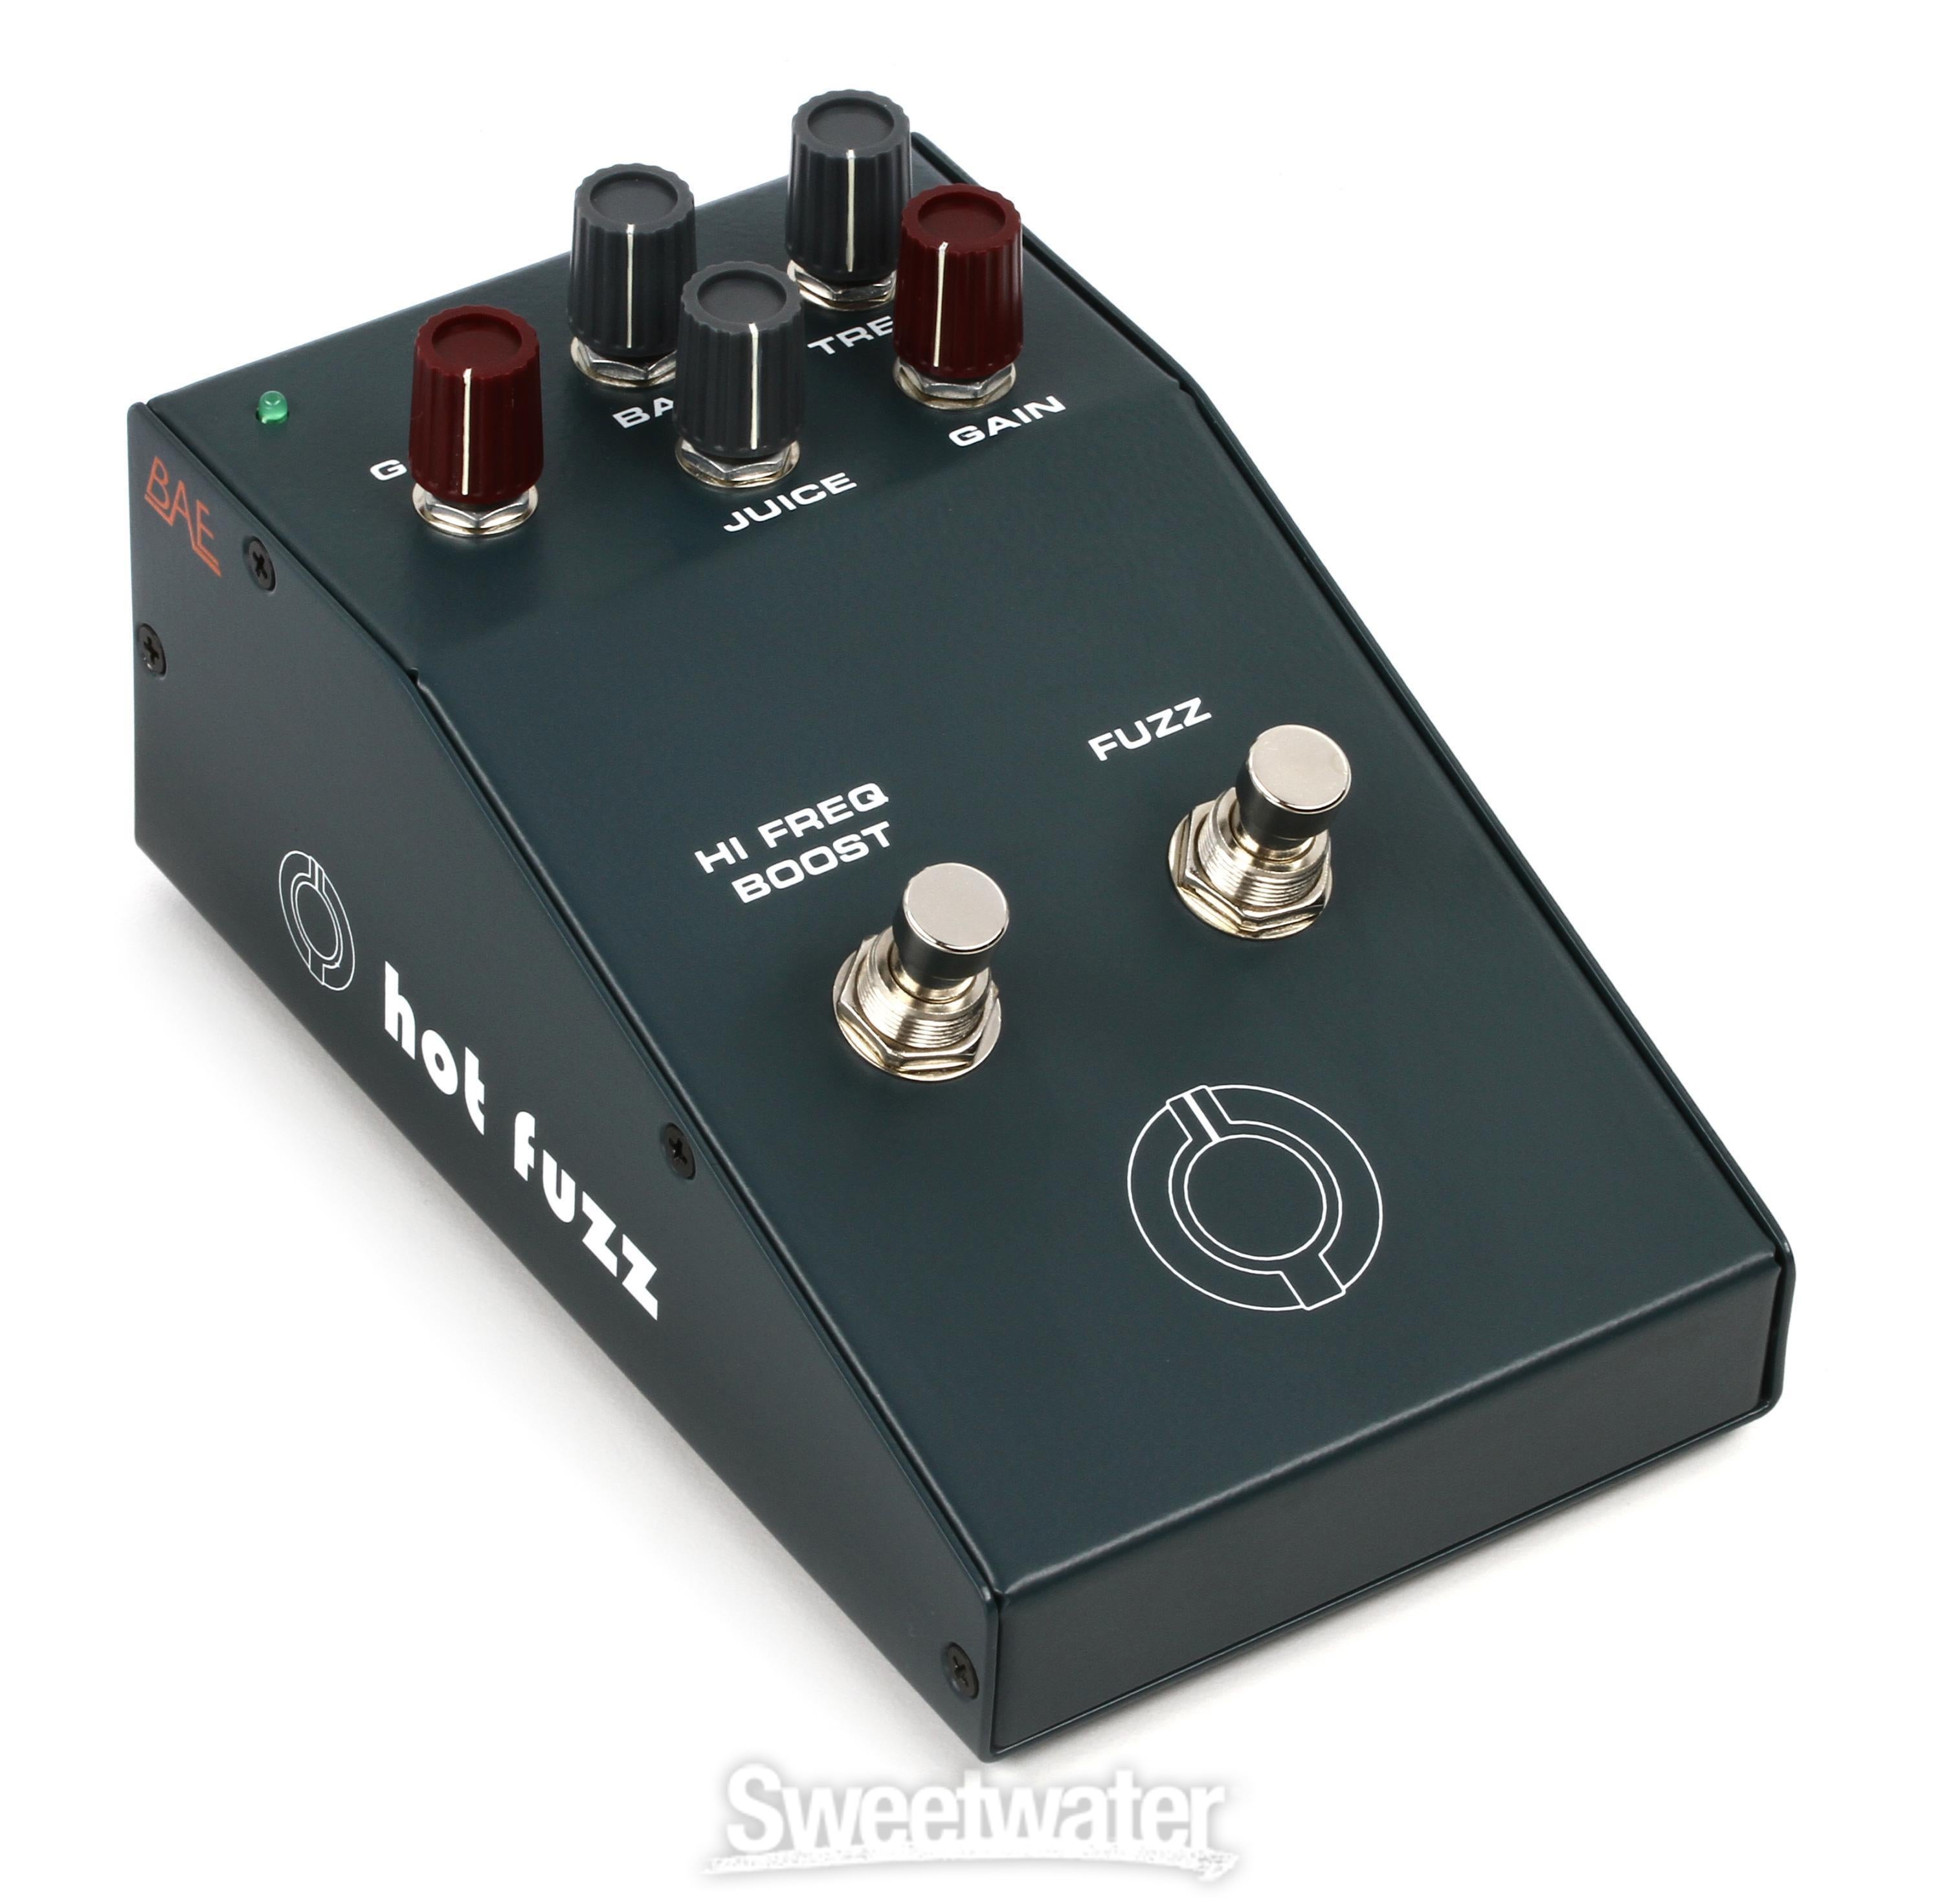 BAE Hot Fuzz Hybrid Fuzz and Treble Boost Pedal Reviews | Sweetwater